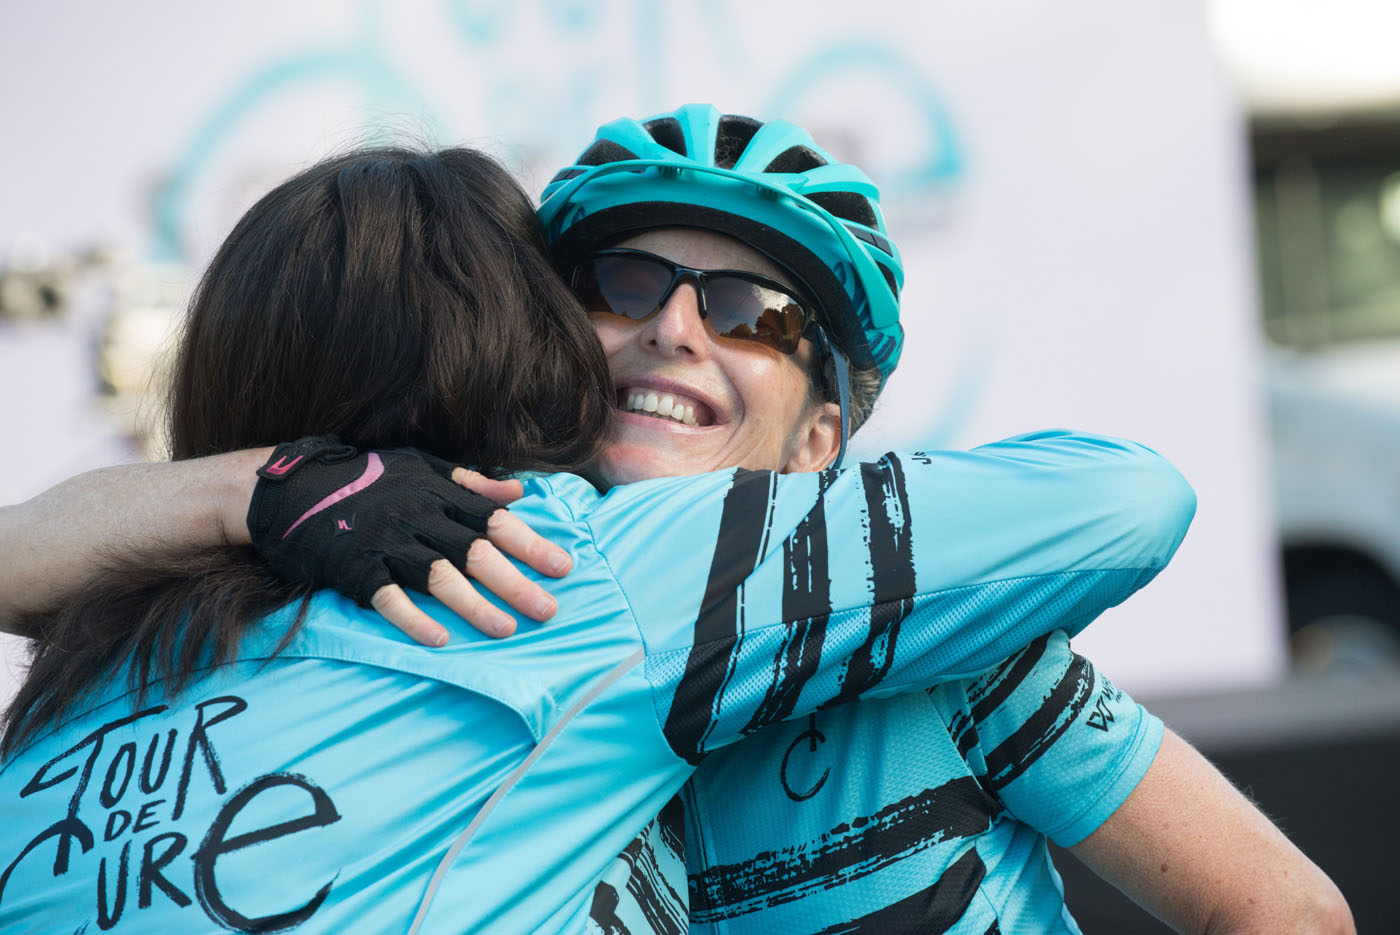 BC Cancer Foundation's Tour de Cure is B.C.’s largest cycling fundraiser